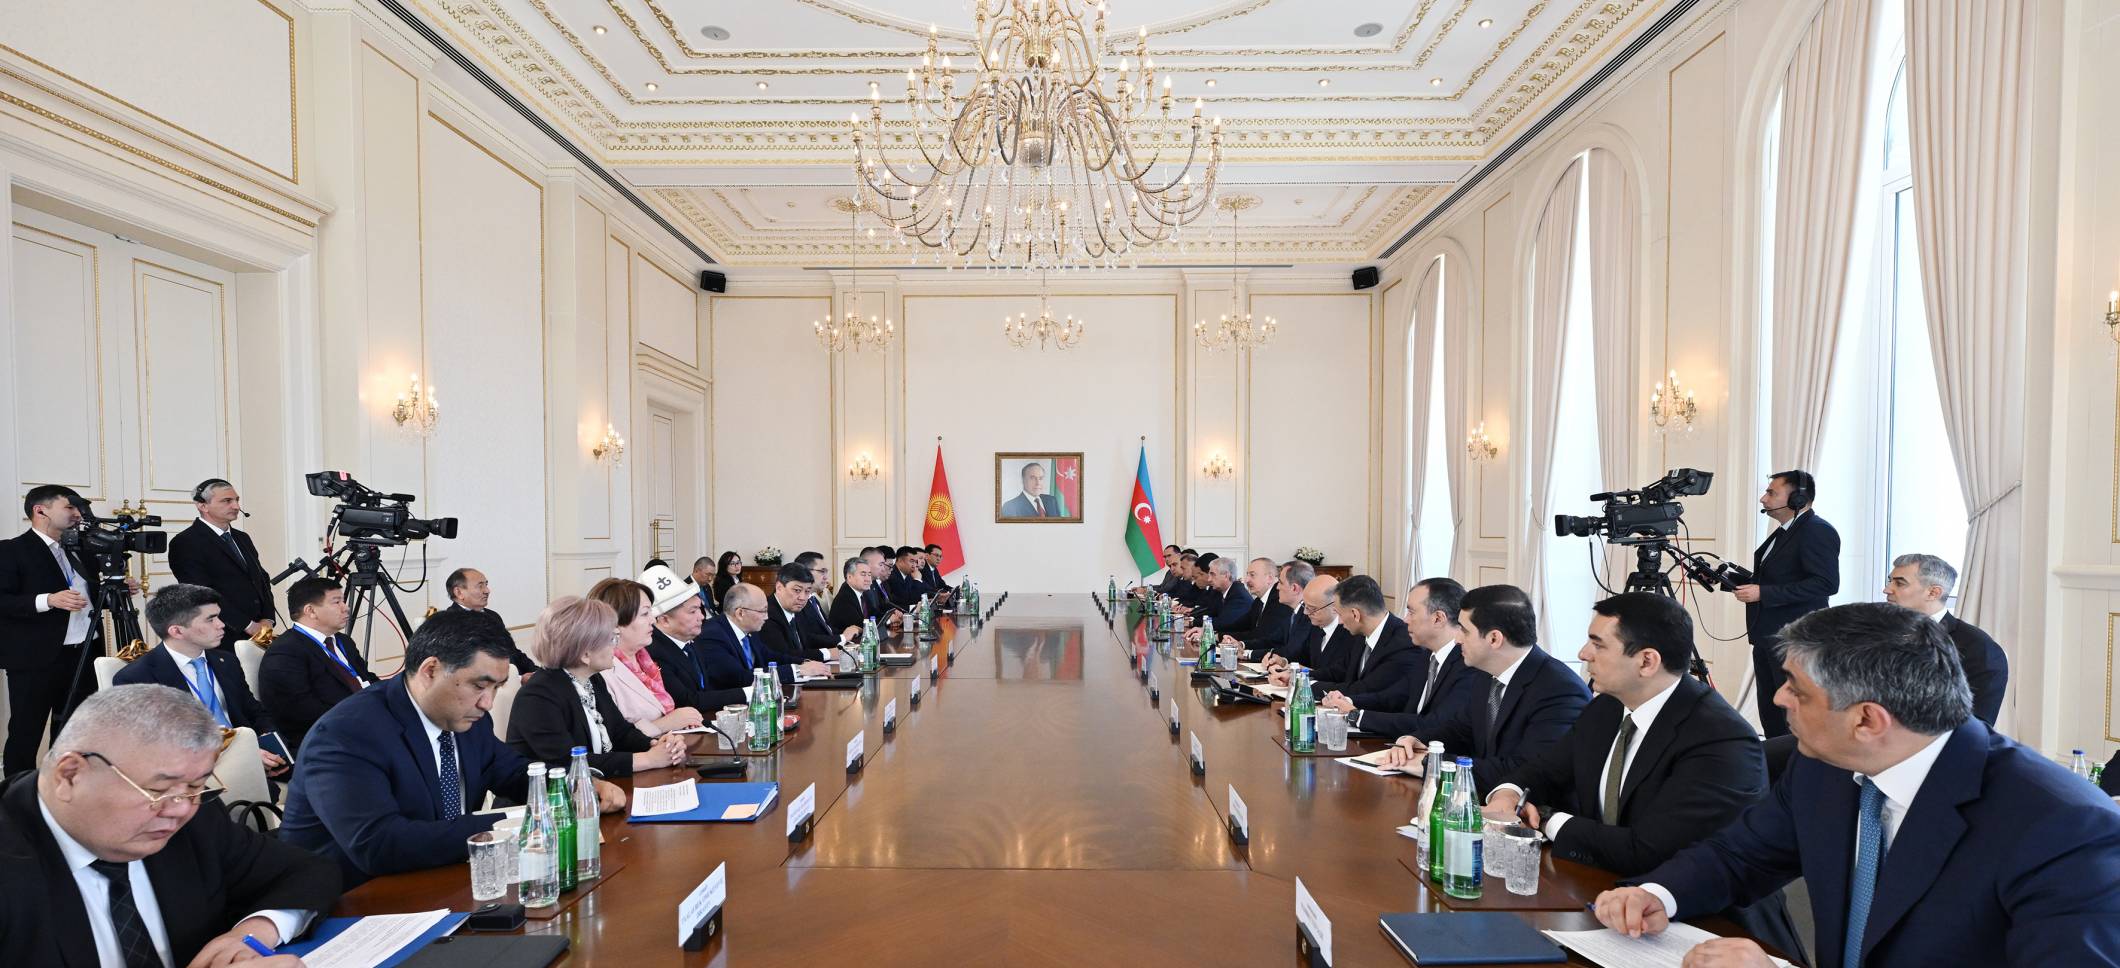 The 2nd meeting of the Azerbaijan-Kyrgyzstan Interstate Council started